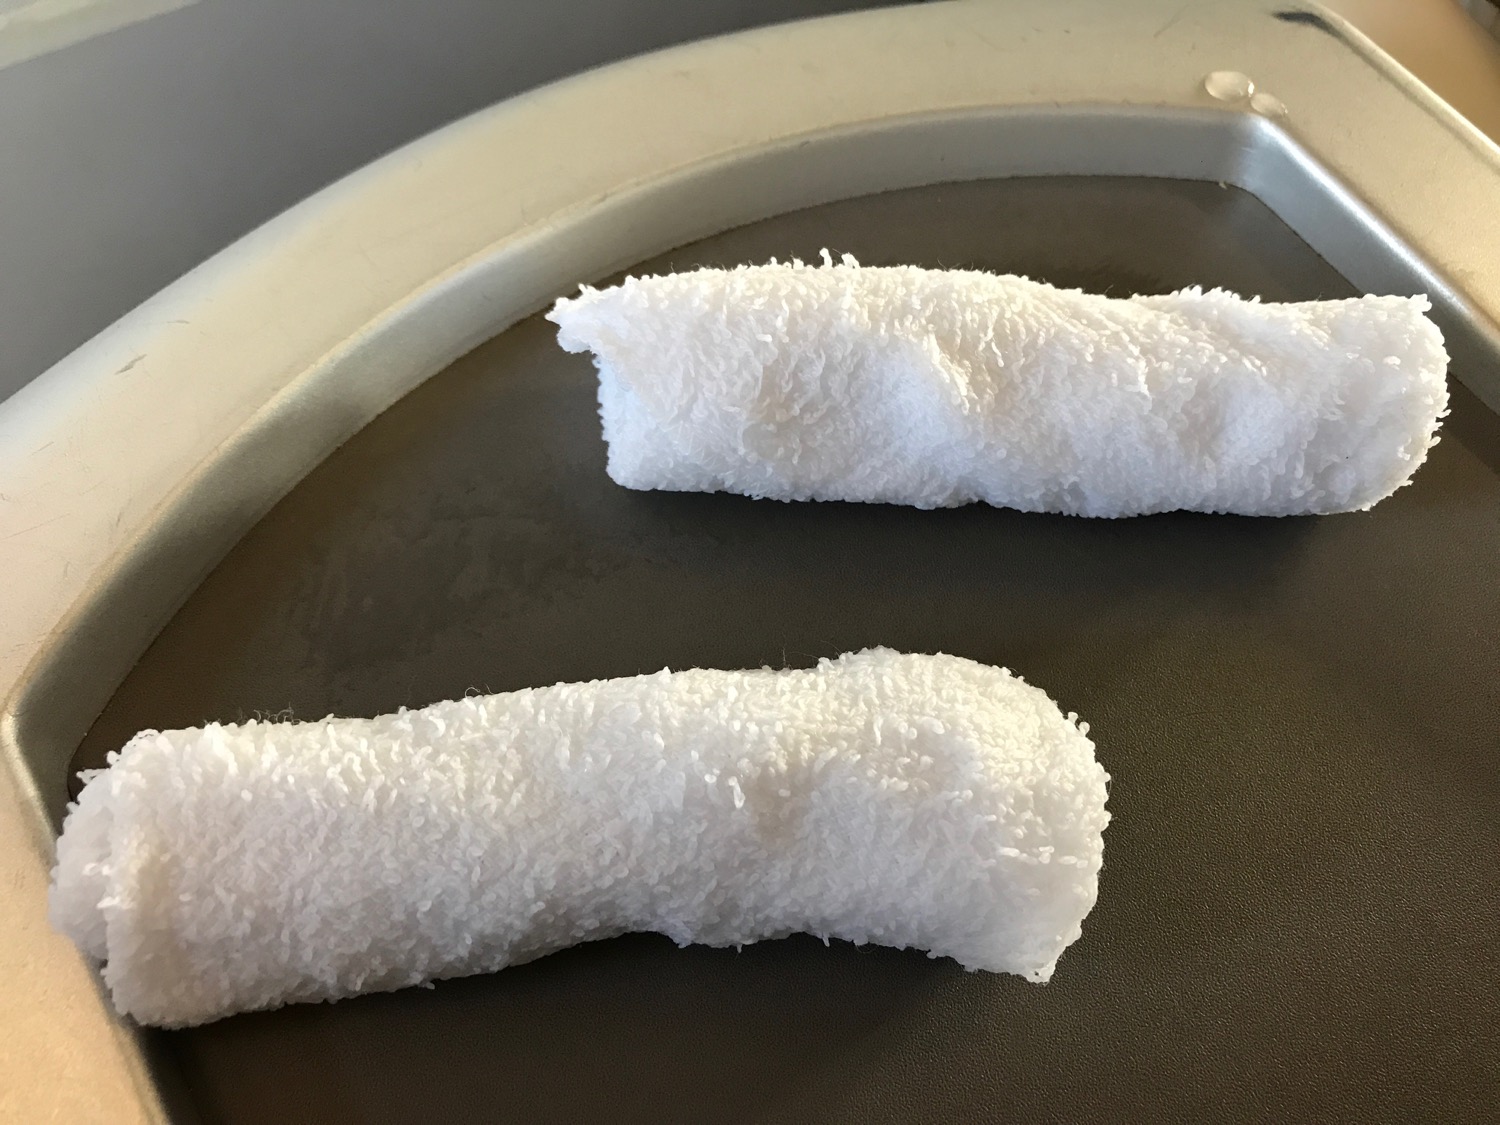 a pair of white rolled up towels